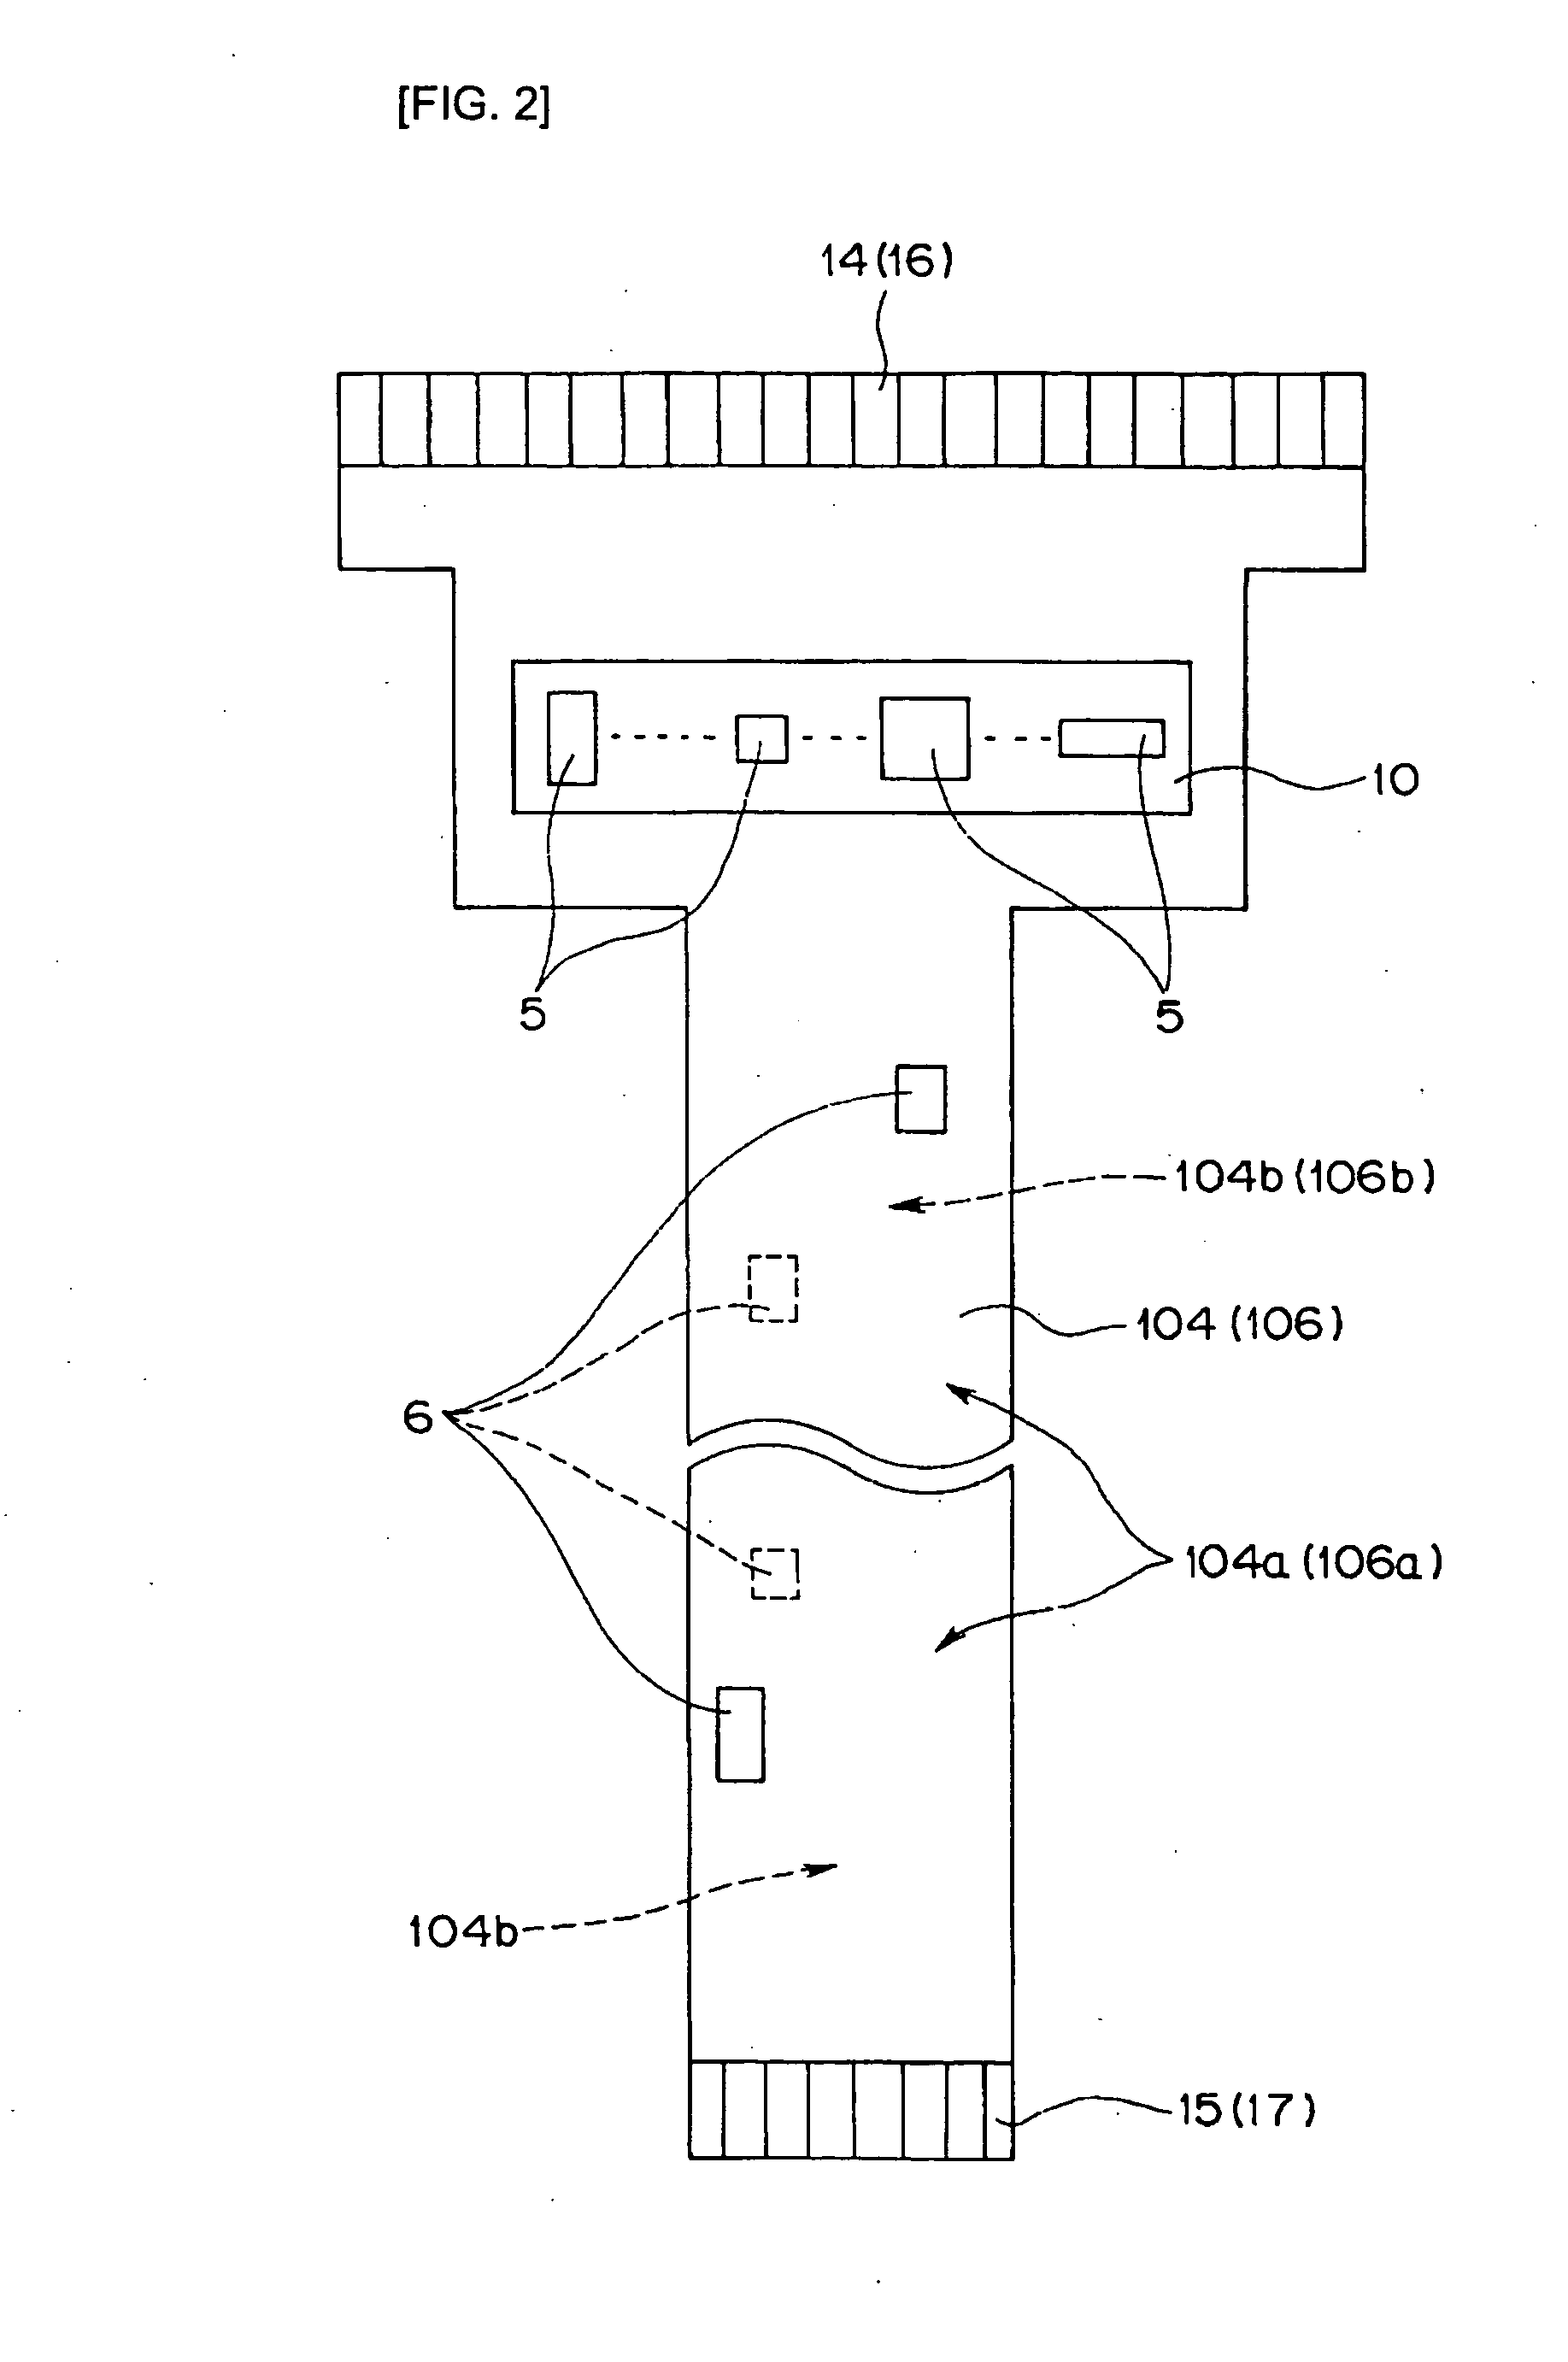 Electro-optical apparatus, flexible printed circuit board, manufacturing method for electro-optical apparatus, and electronic equipment